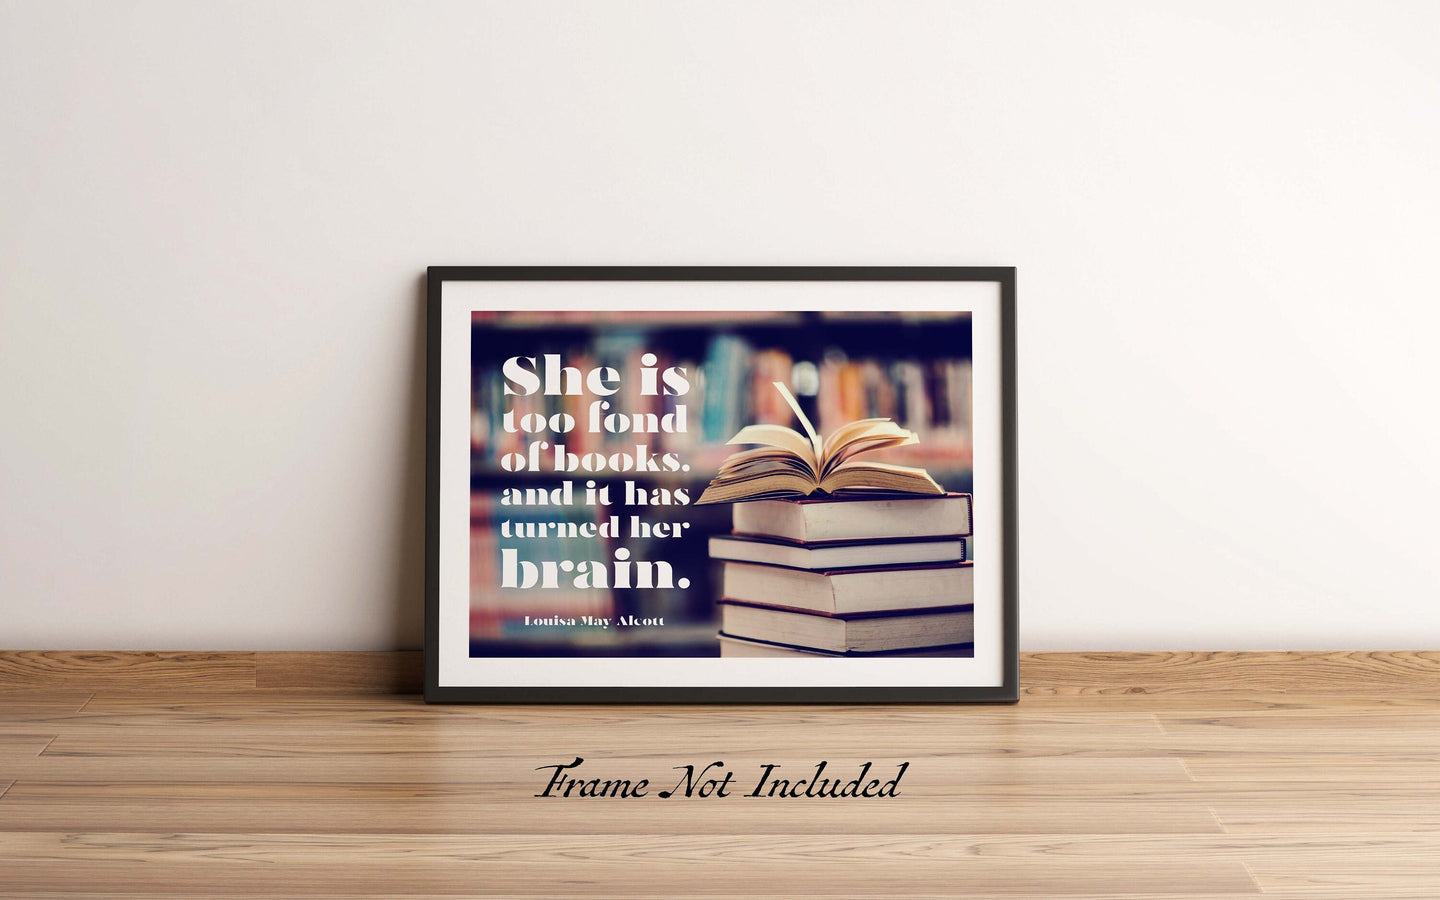 Louisa May Alcott Quote - Reading Nook Decor - She is too fond of books, and it has turned her brain - Physical Art Print Without Frame